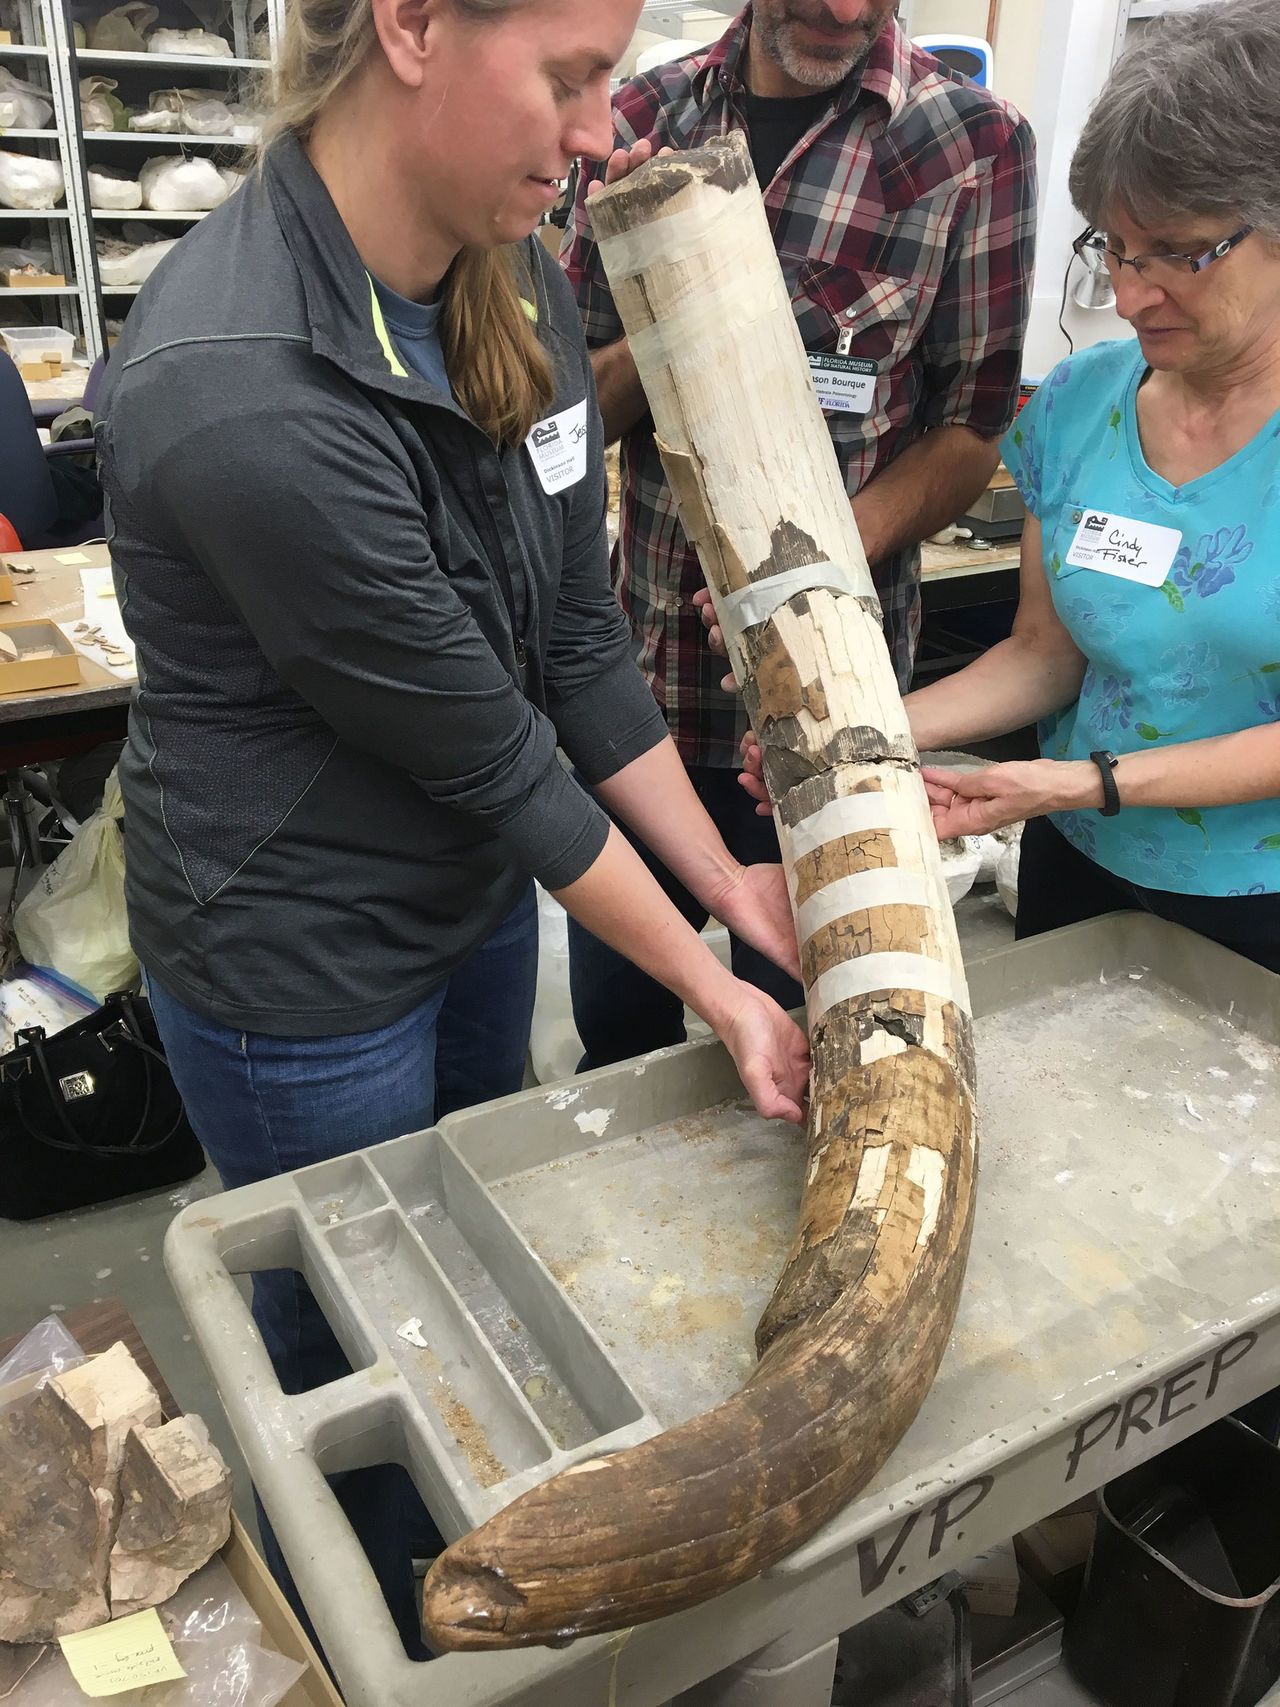 Jessi Halligan, left, and other researchers hold a partially reassembled Mastodon tusk from the Page-Ladson archaeological site in Florida in 2012.